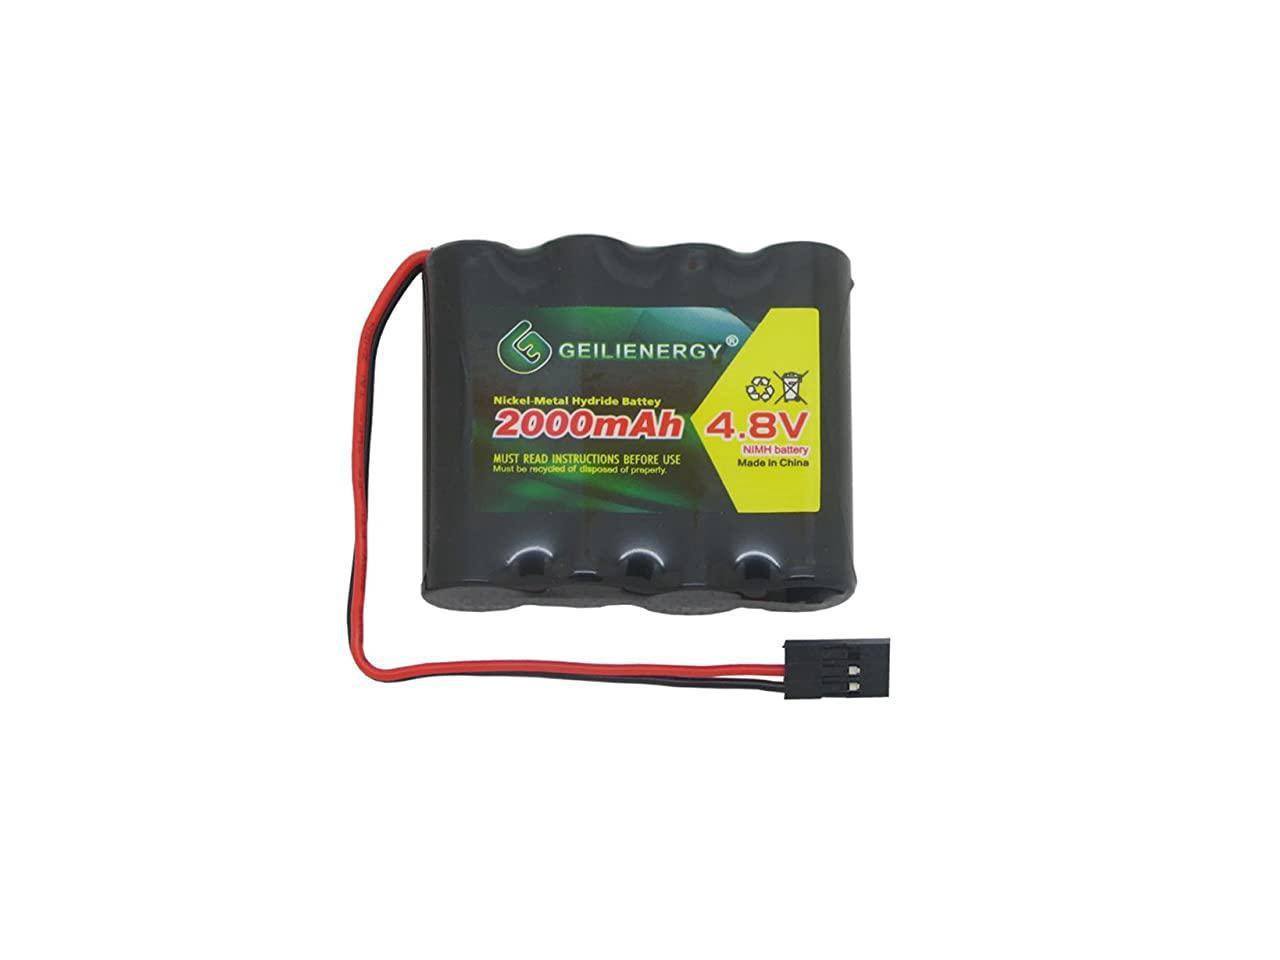 Geilienergy 1x 4.8v 2000mah NiMH Receiver RX Battery Hitec Connector for RC Cars for sale online 